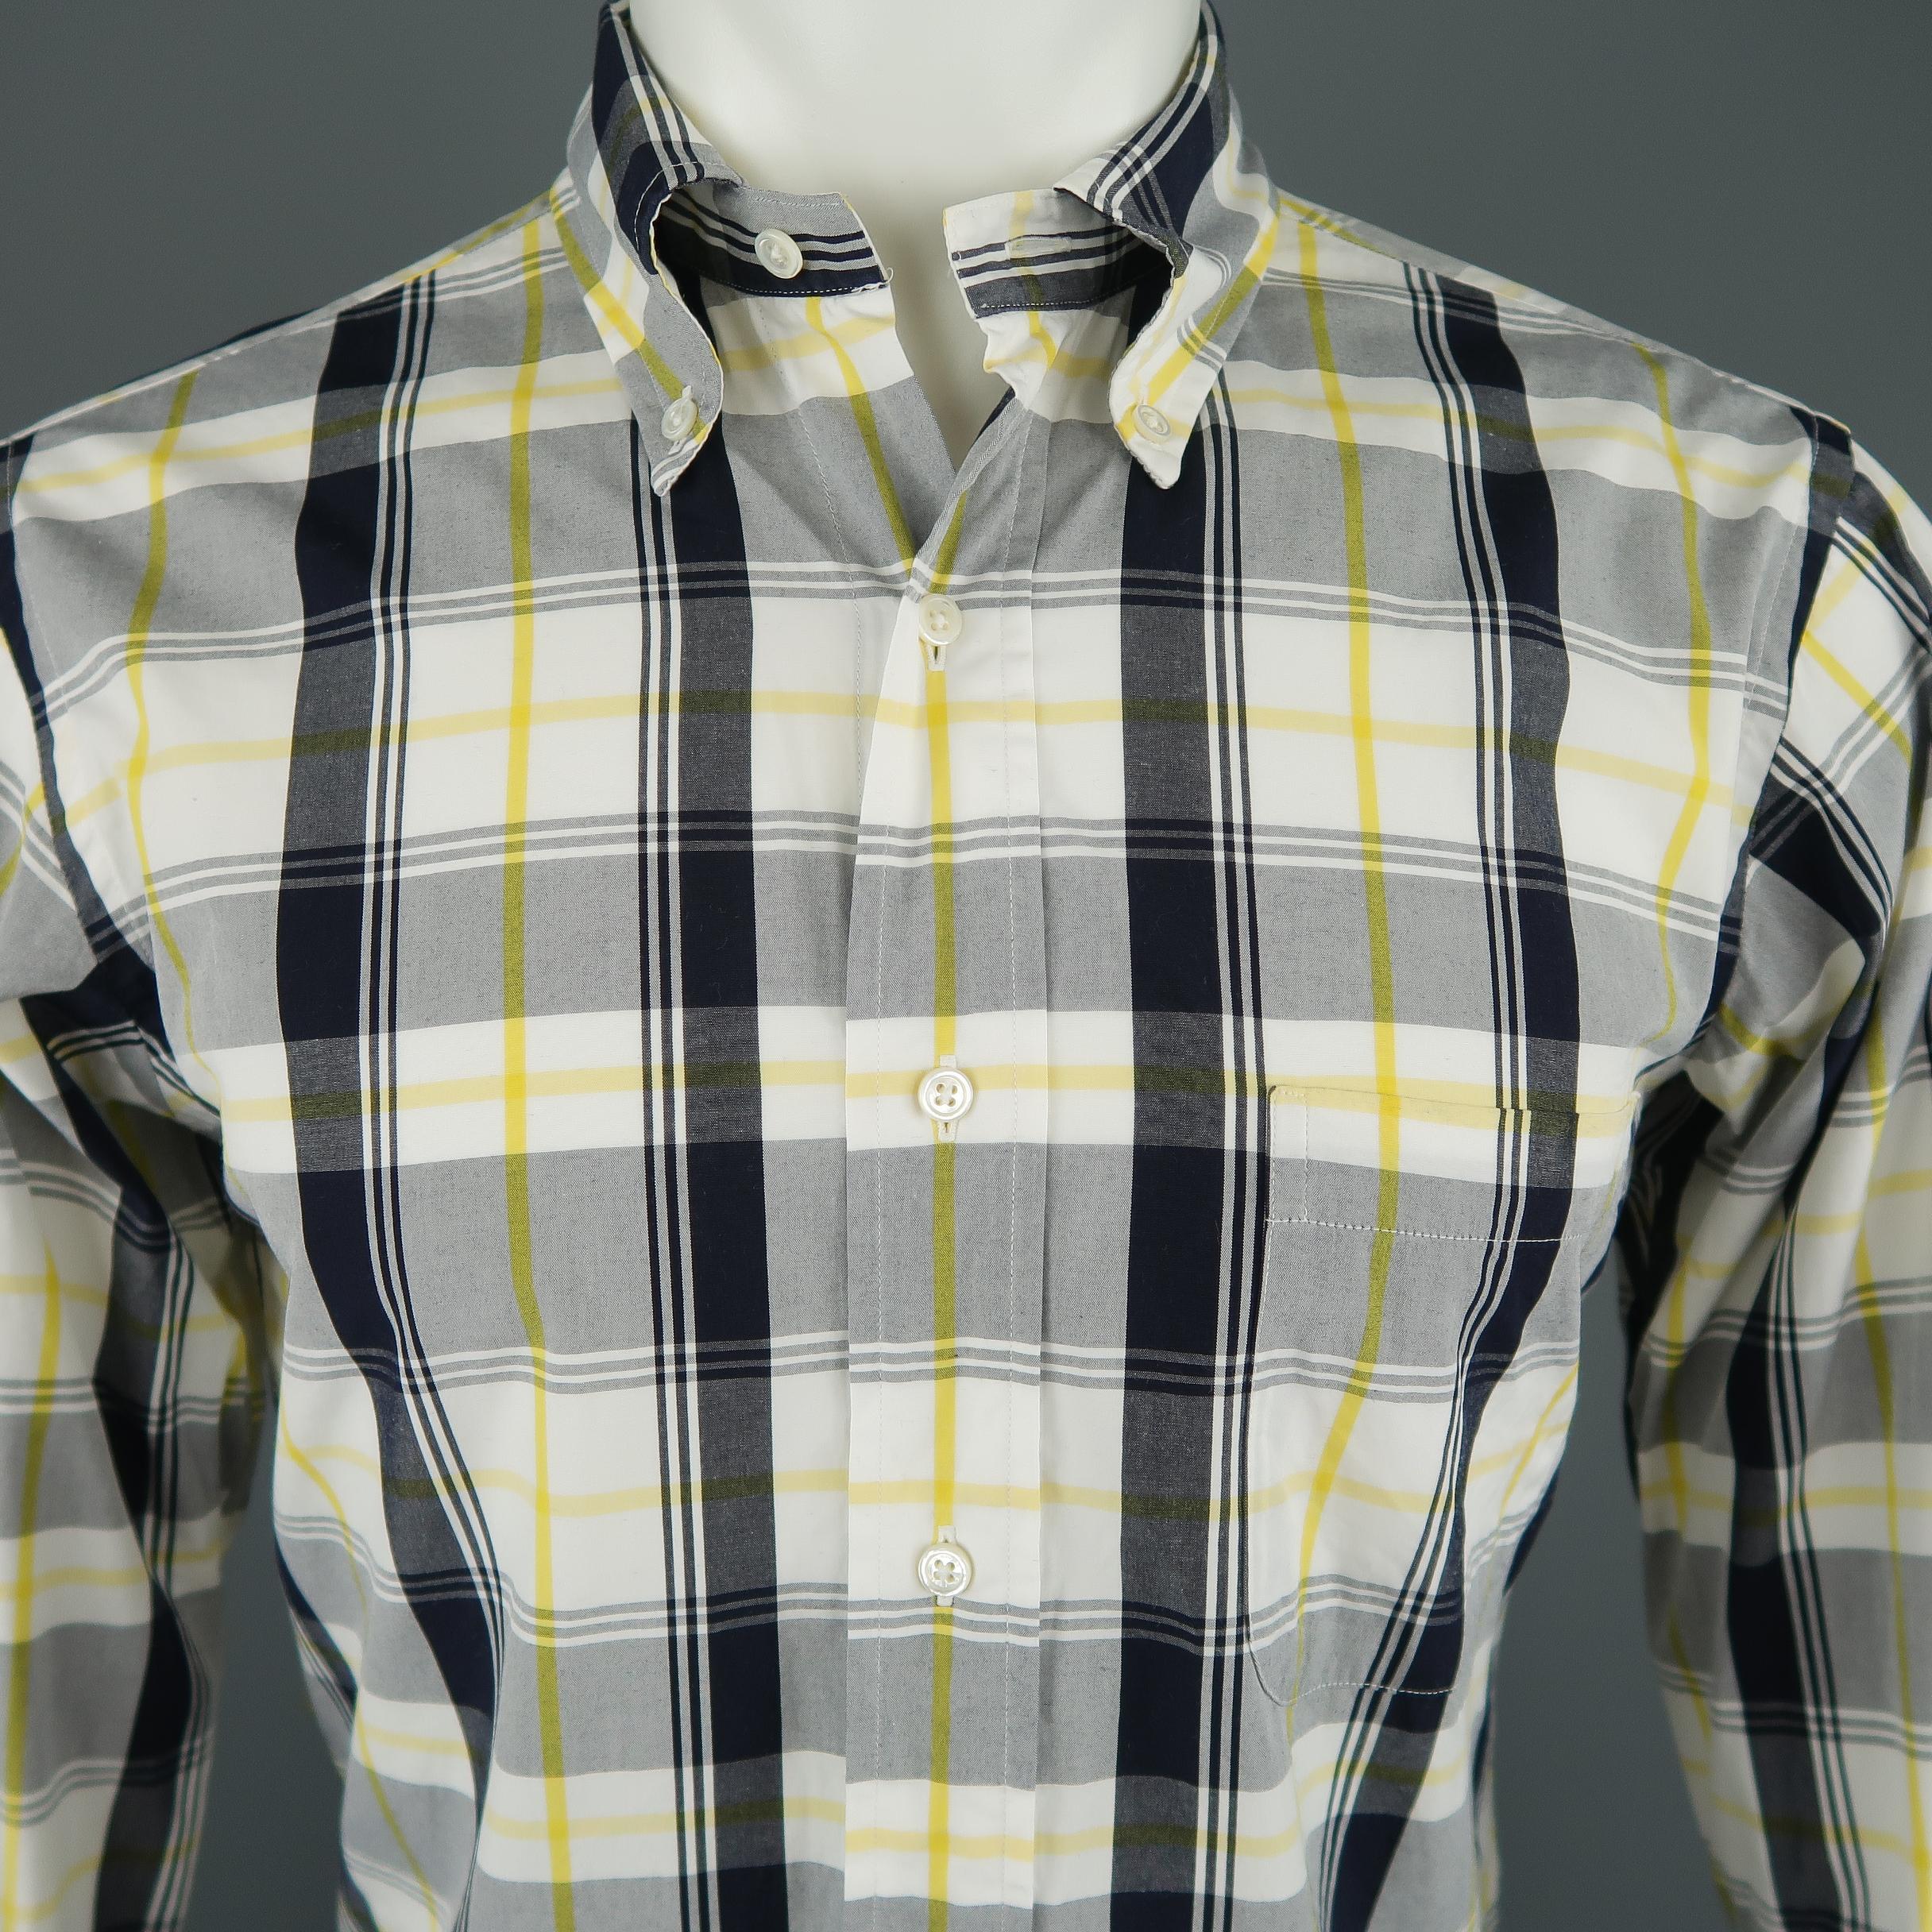 BLACK FLEECE shirt comes in off white cotton with navy and yellow plaid pattern throughout, button down collar, curved hem, and patch pocket. Made in USA. Retail price $225,00. 
 
Excellent Pre-Owned Condition.
Marked: BB1
 
Measurements:
